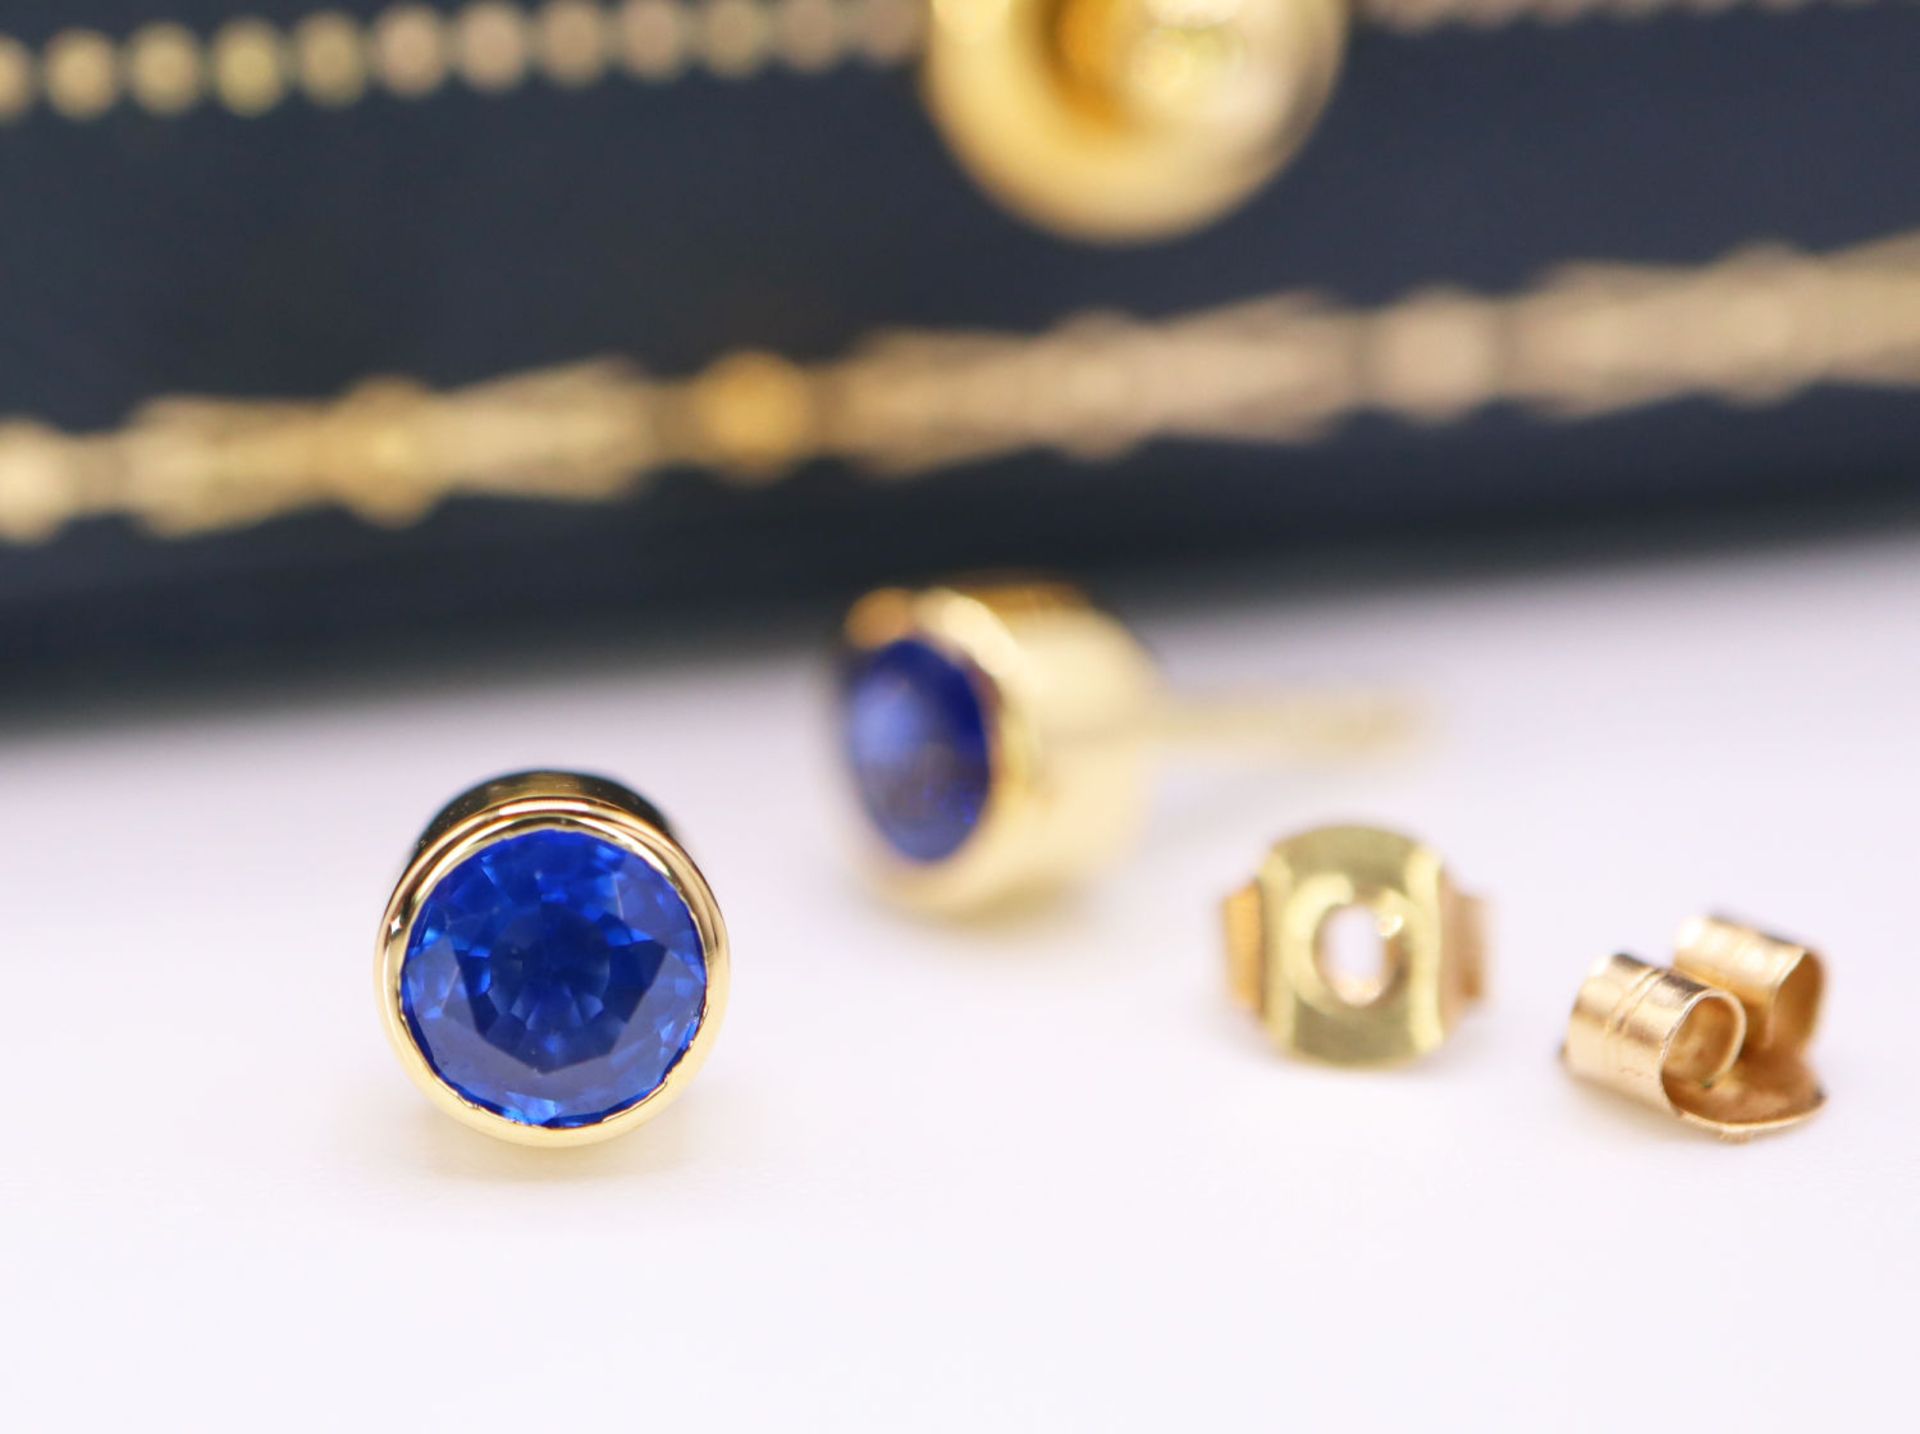 *BEAUTIFUL* 1.30CT BRIGHT BLUE SAPPHIRE STUD EARRINGS SET IN 18K YELLOW GOLD - Image 3 of 4